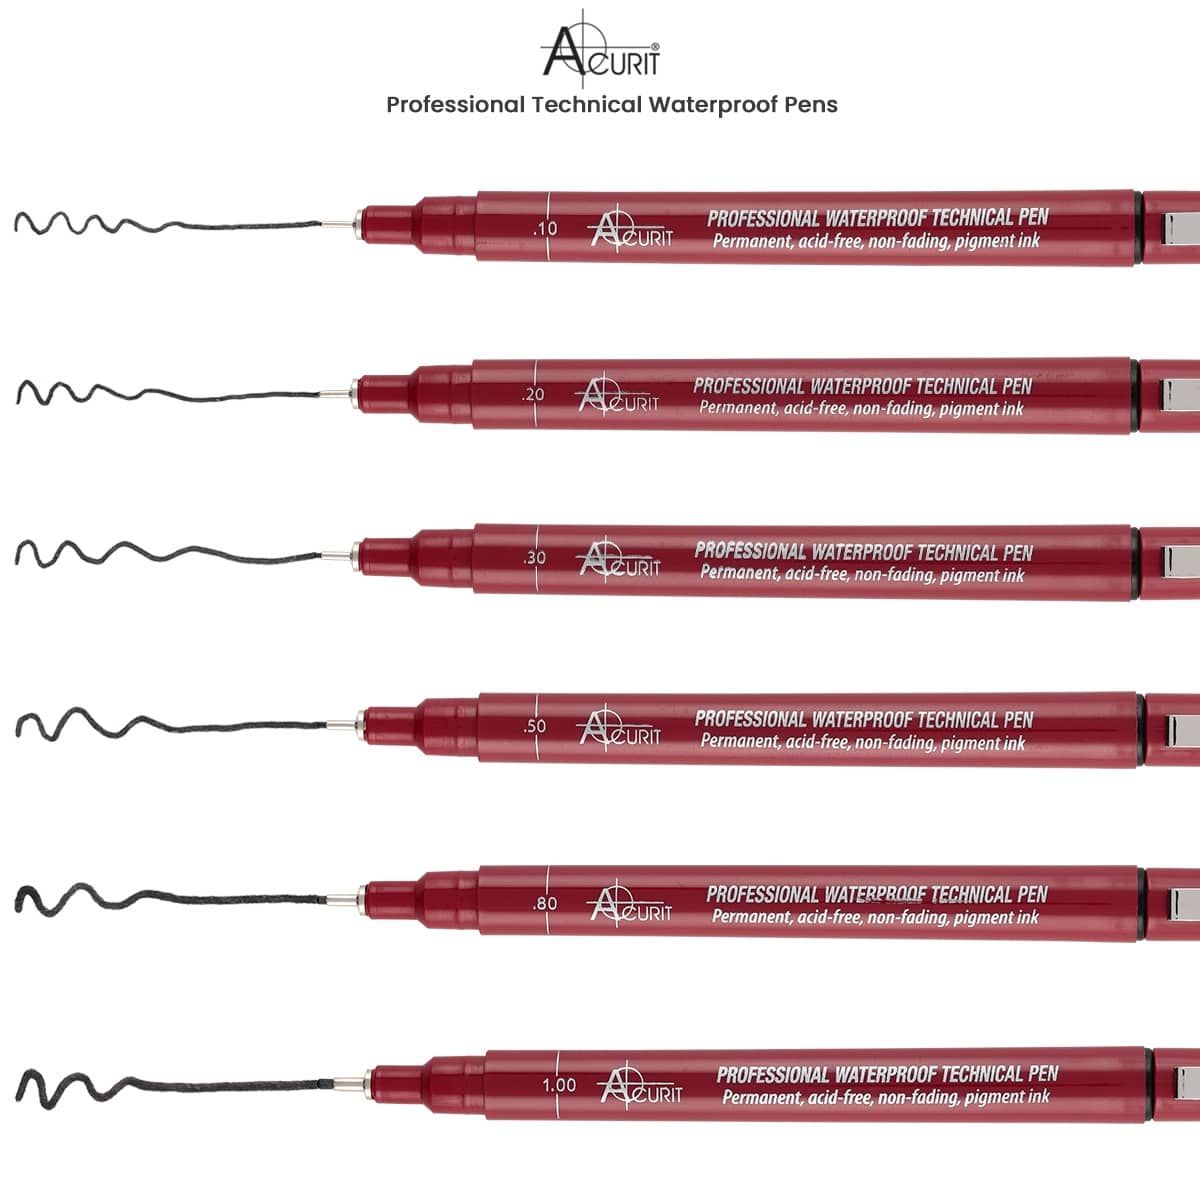 Acurit Professional Waterproof Technical Pens